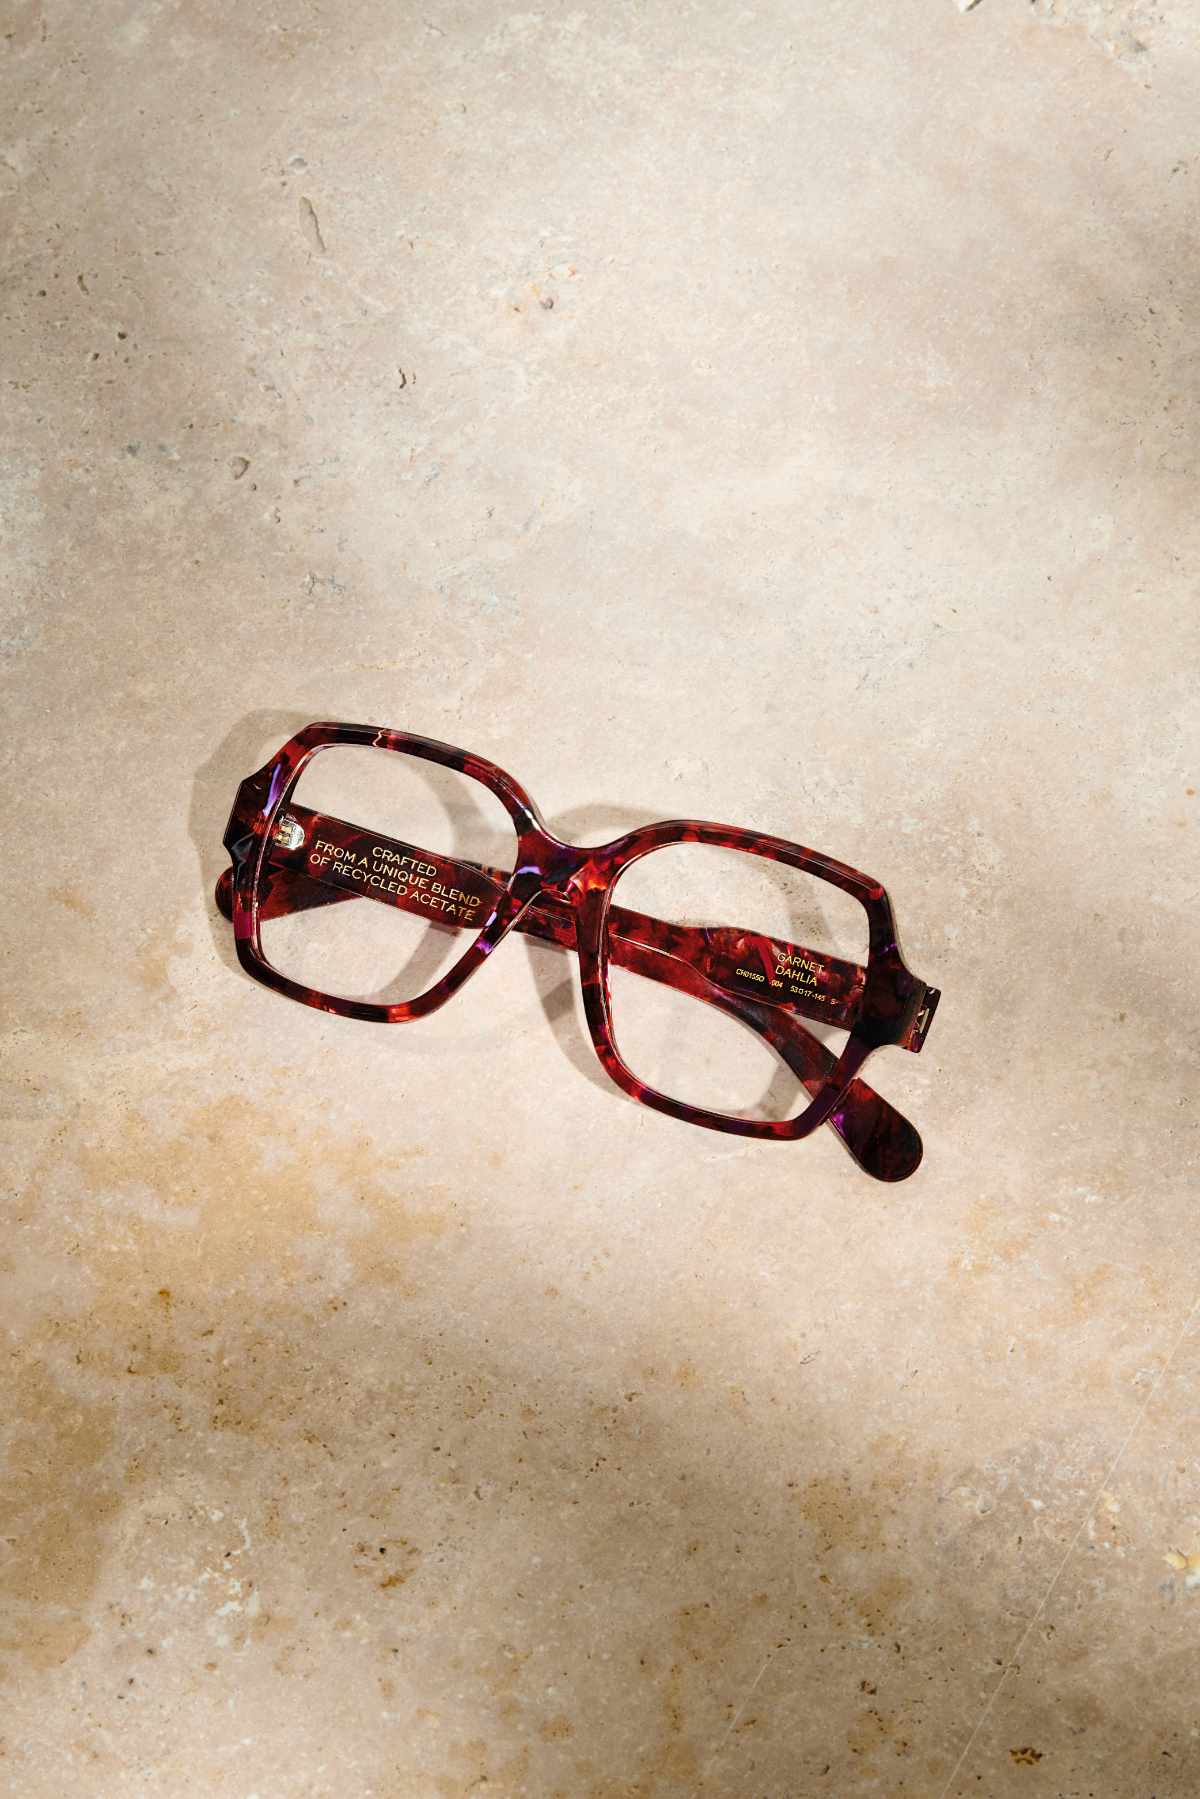 How Kering Eyewear Is Striving to Become Ecologically Sustainable